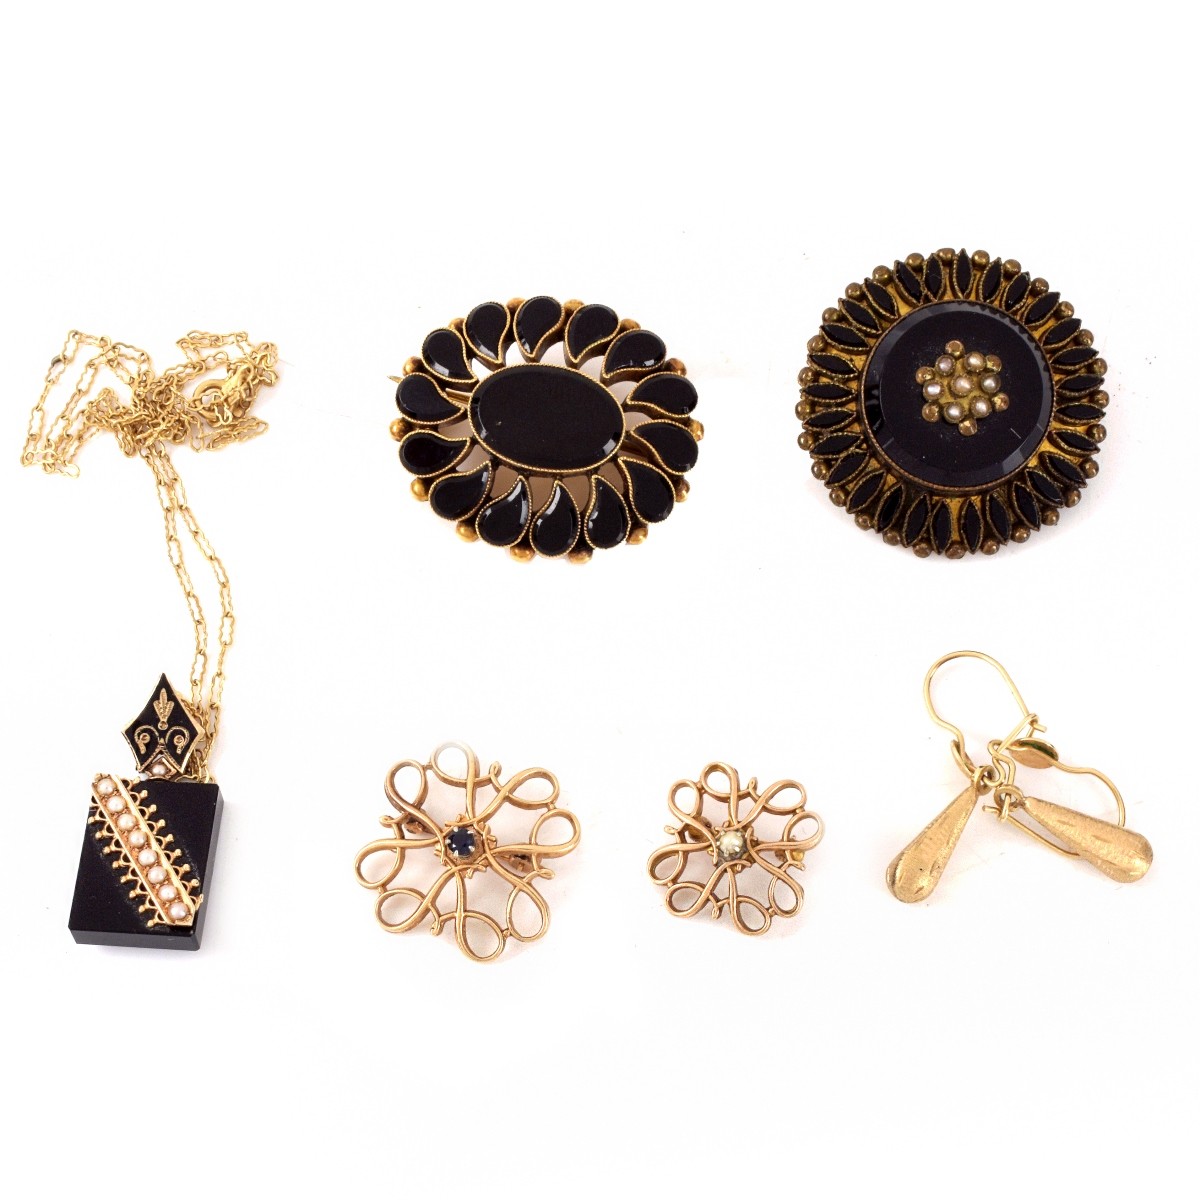 Gold and Onyx Jewelry